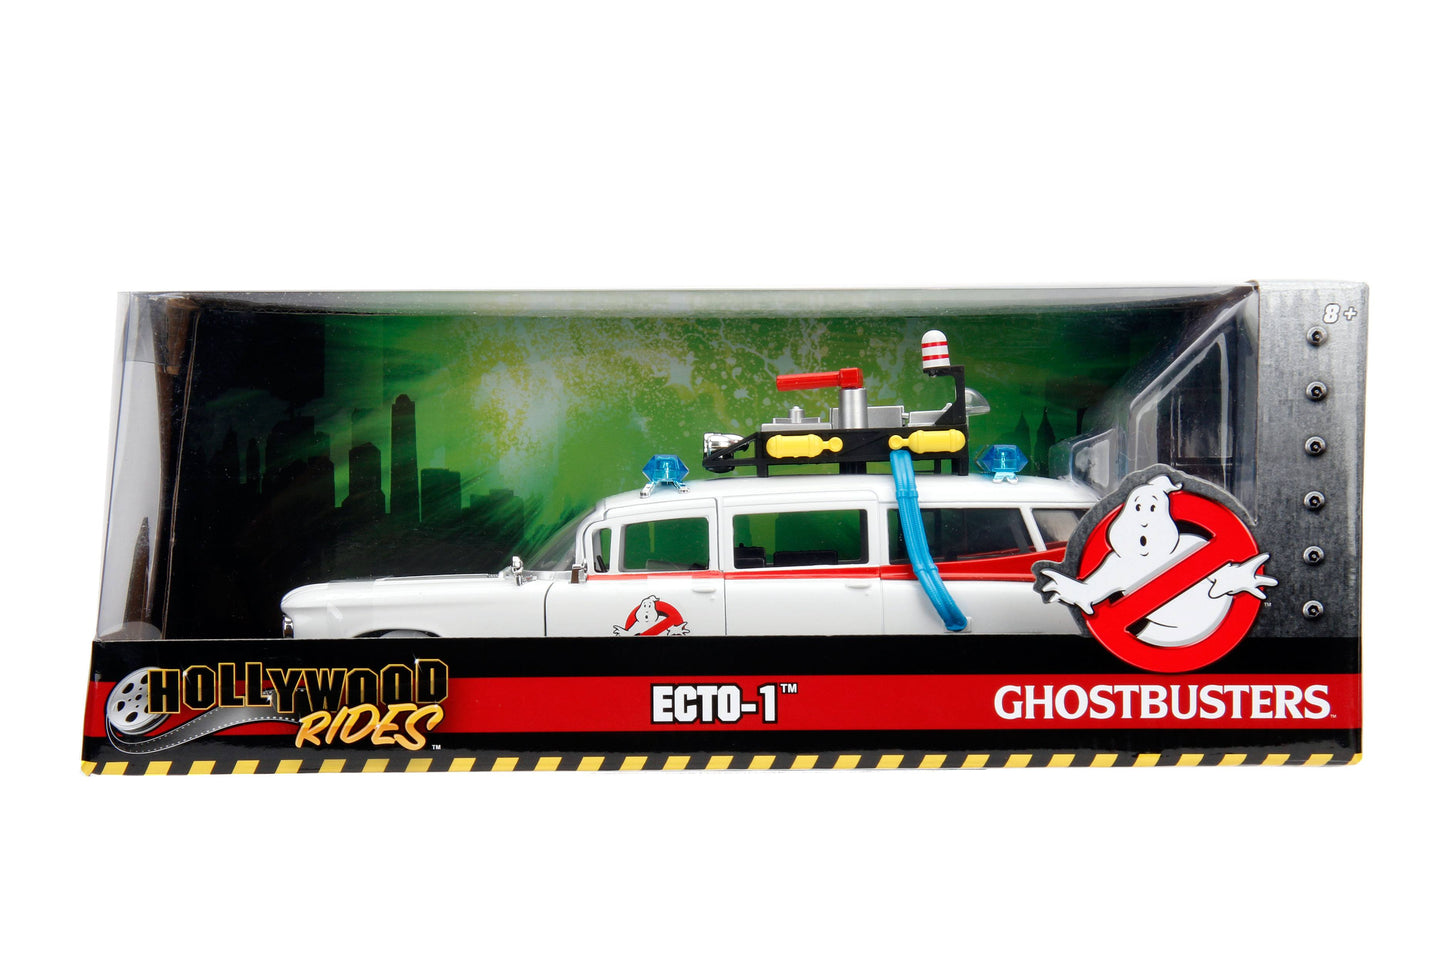 Ghostbusters Diecast 1959 Cadillac Ecto-1